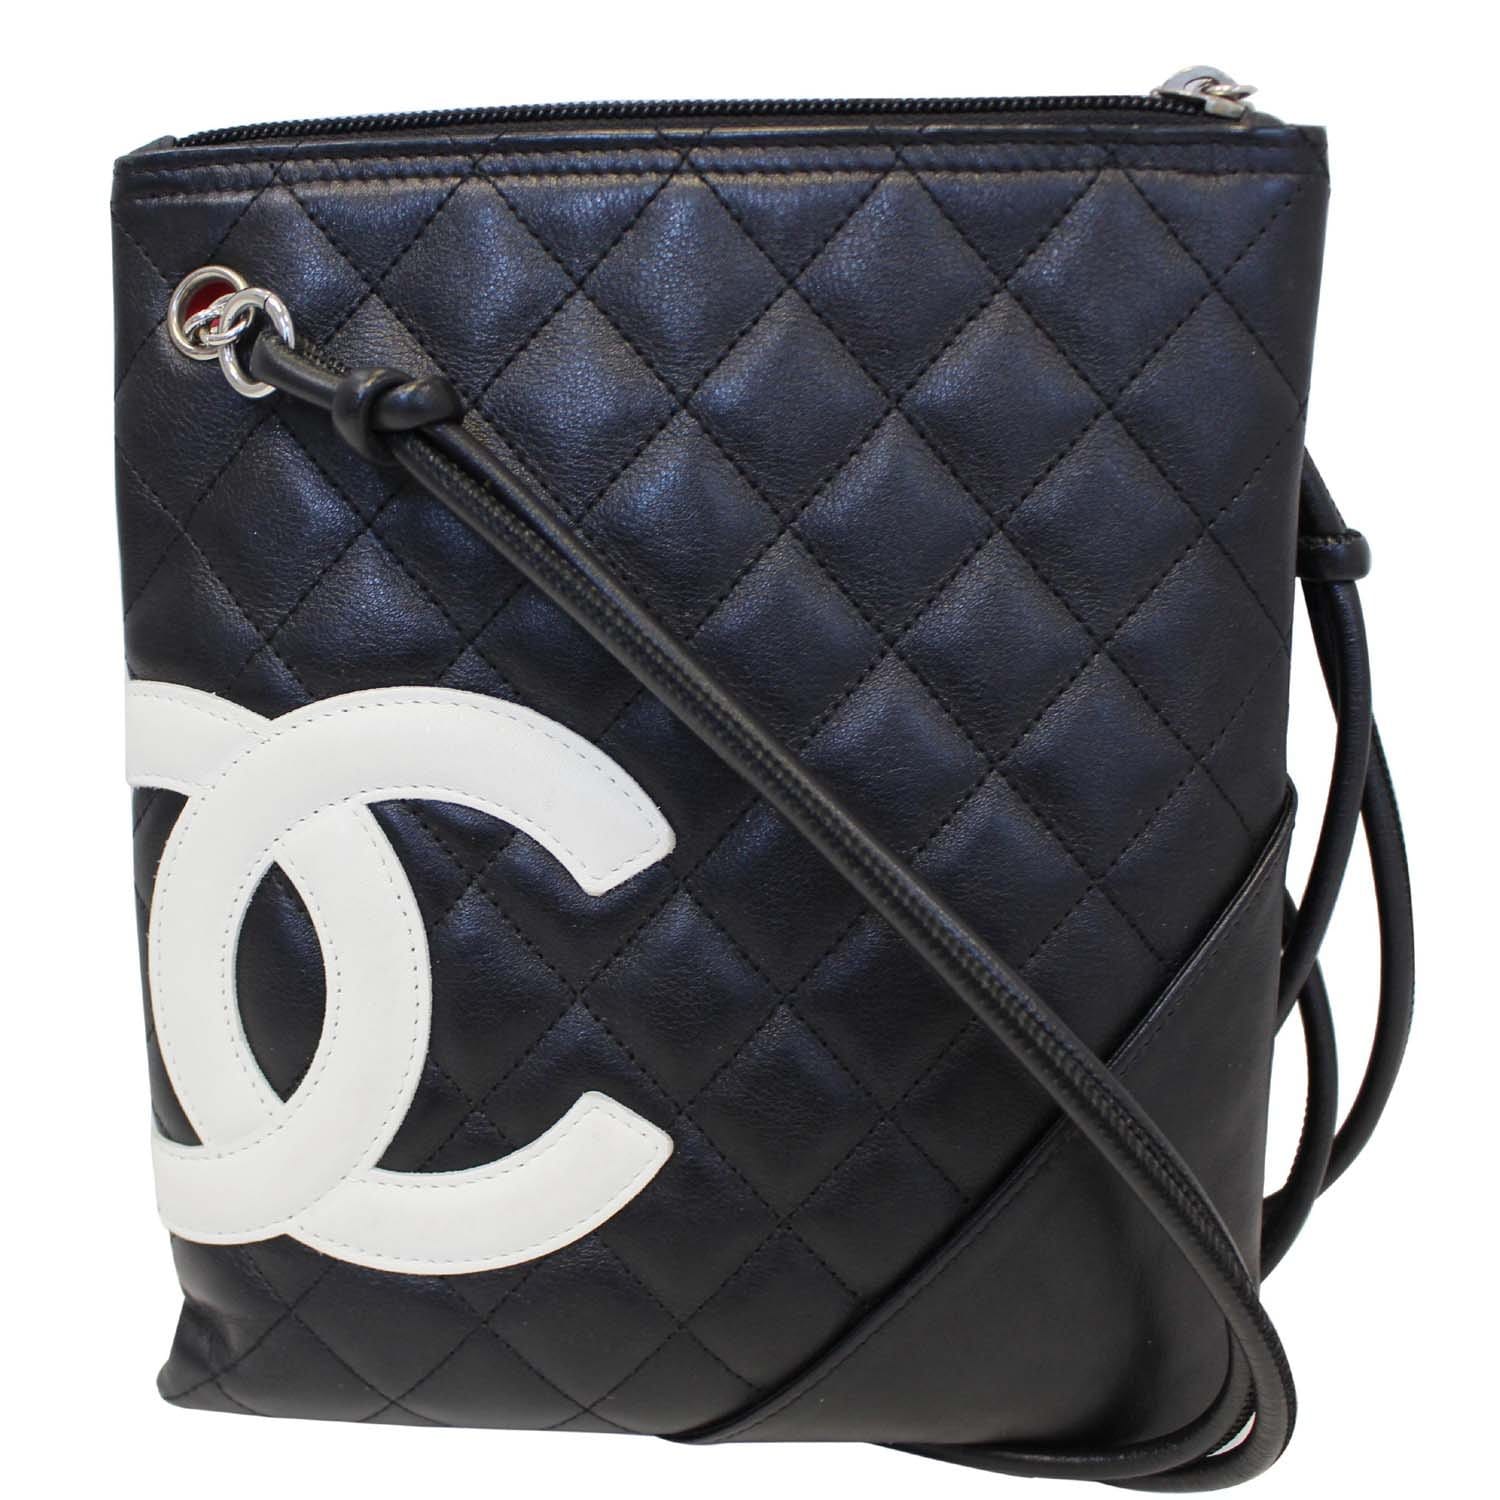 Cambon small rectangle leather handbag Chanel Black in Leather - 25777772